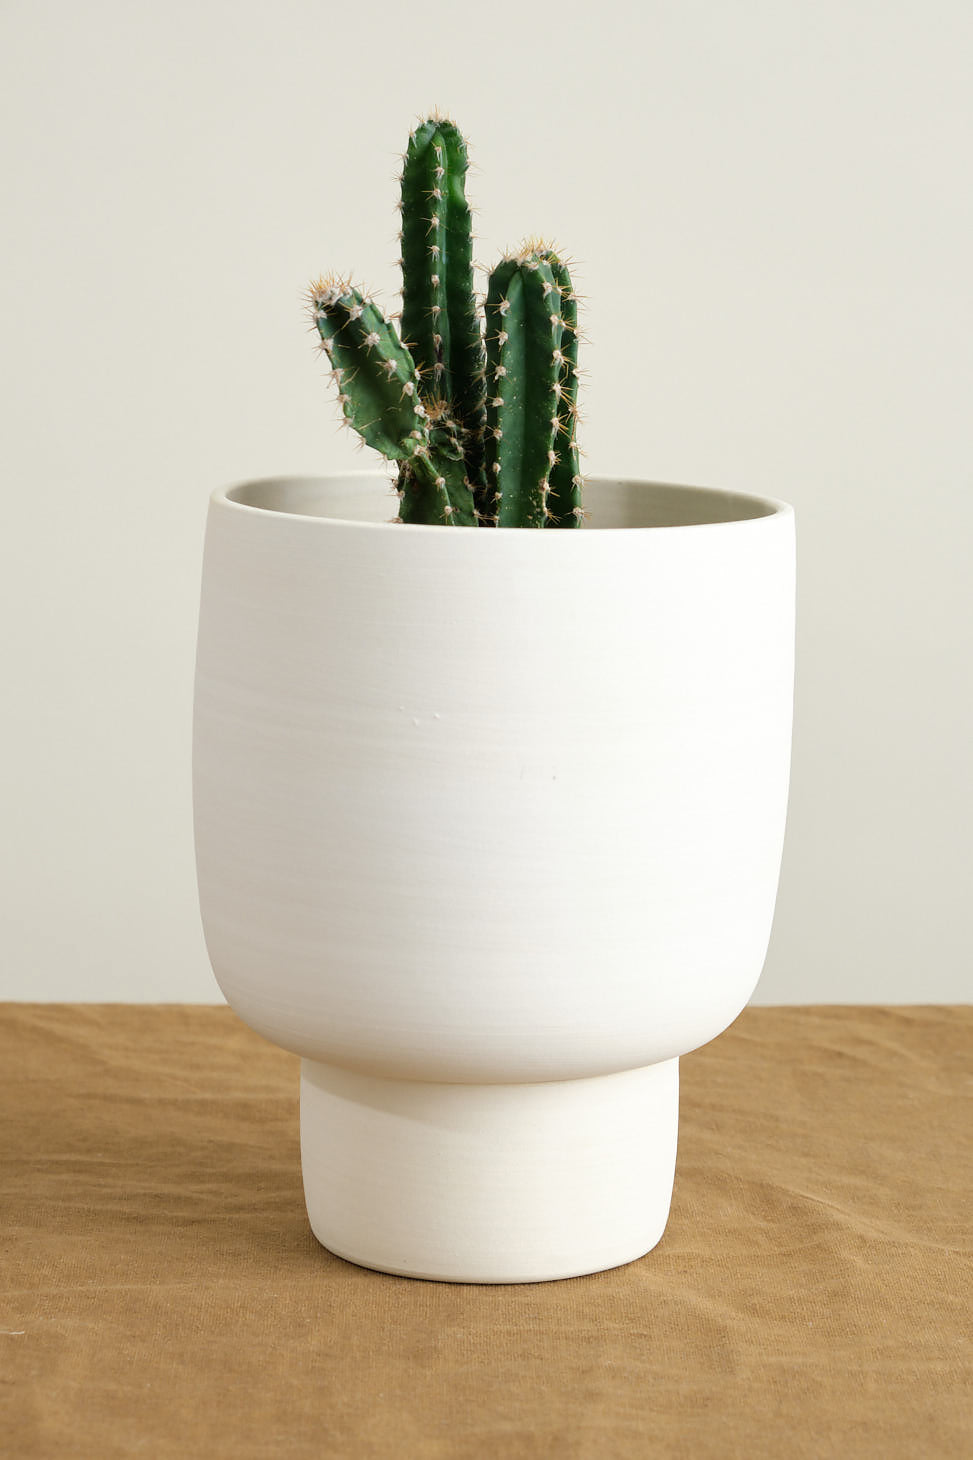 Small Pedestal Planter on table